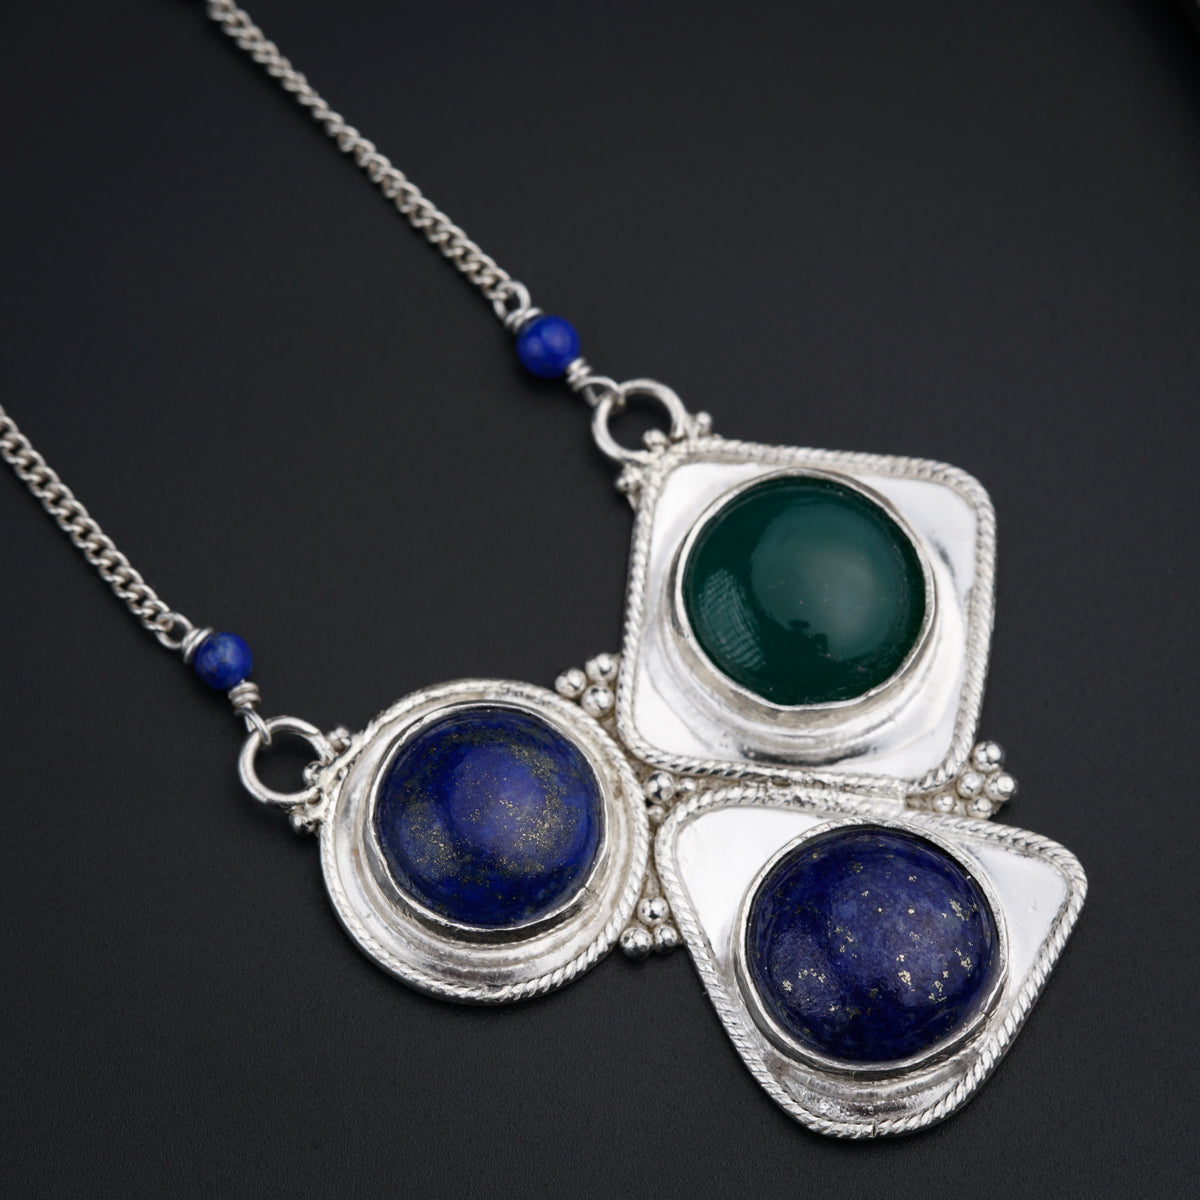 three pendants with blue and green beads on a black surface